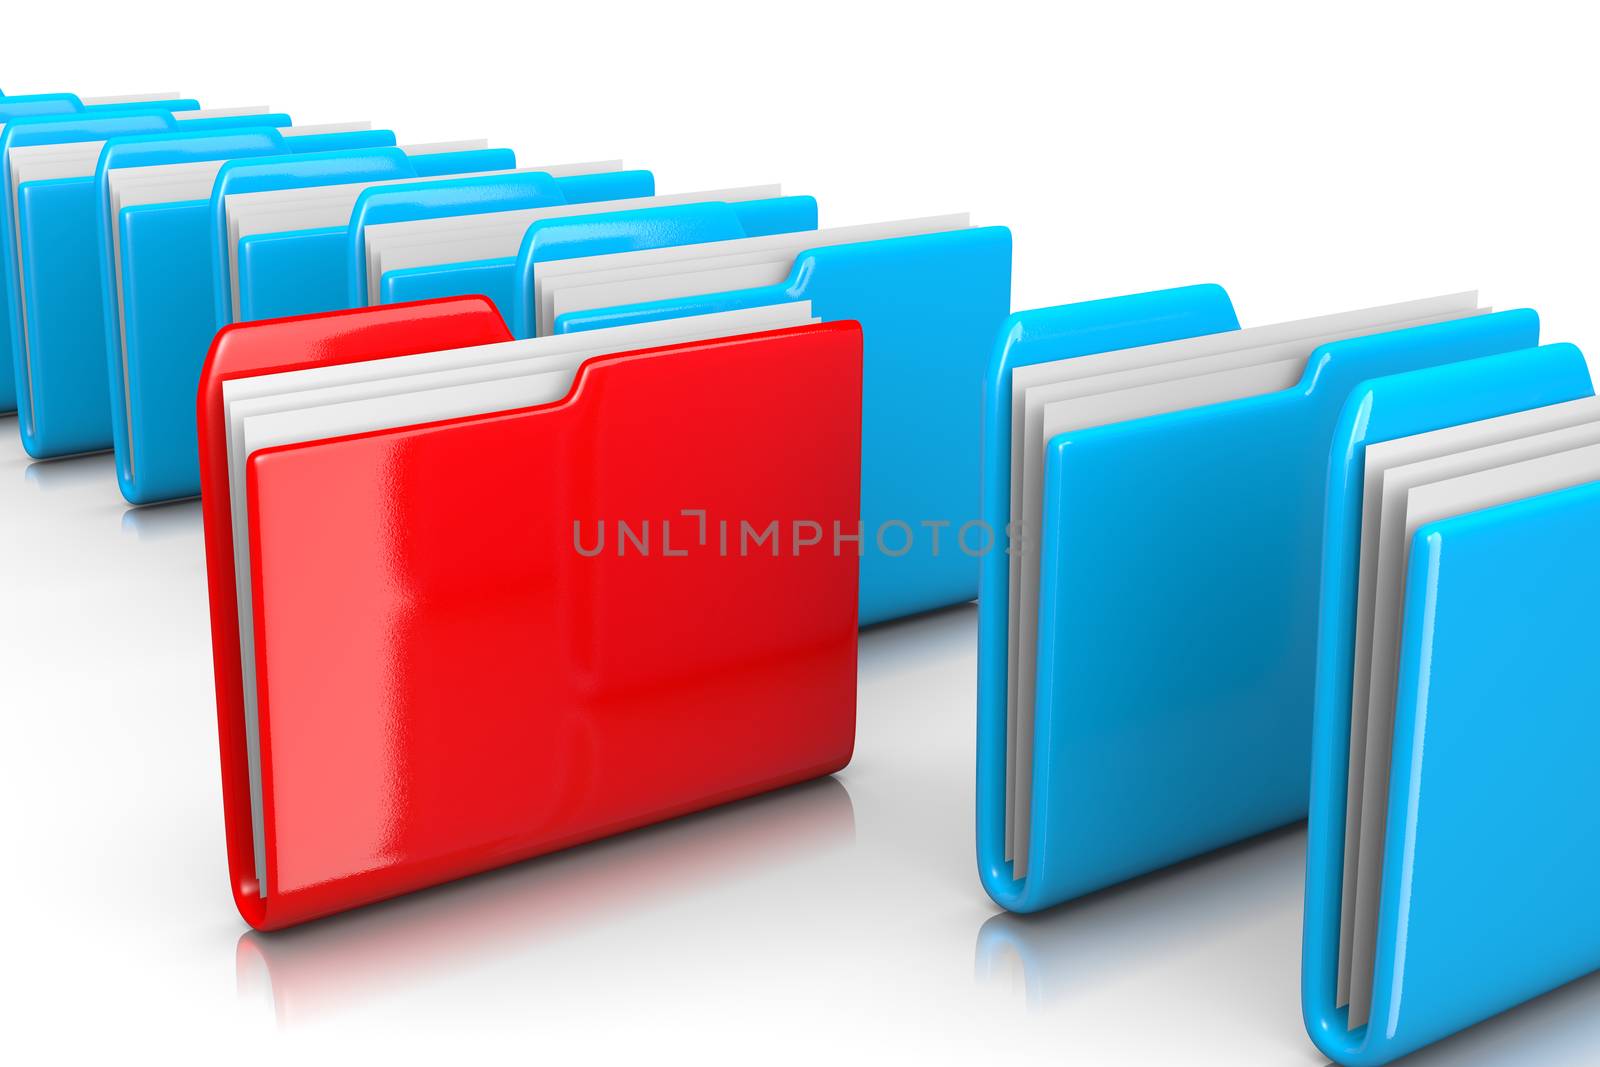 Single Red Document Folder among Many Blue on White Background 3D Illustration, Find Documents Concept